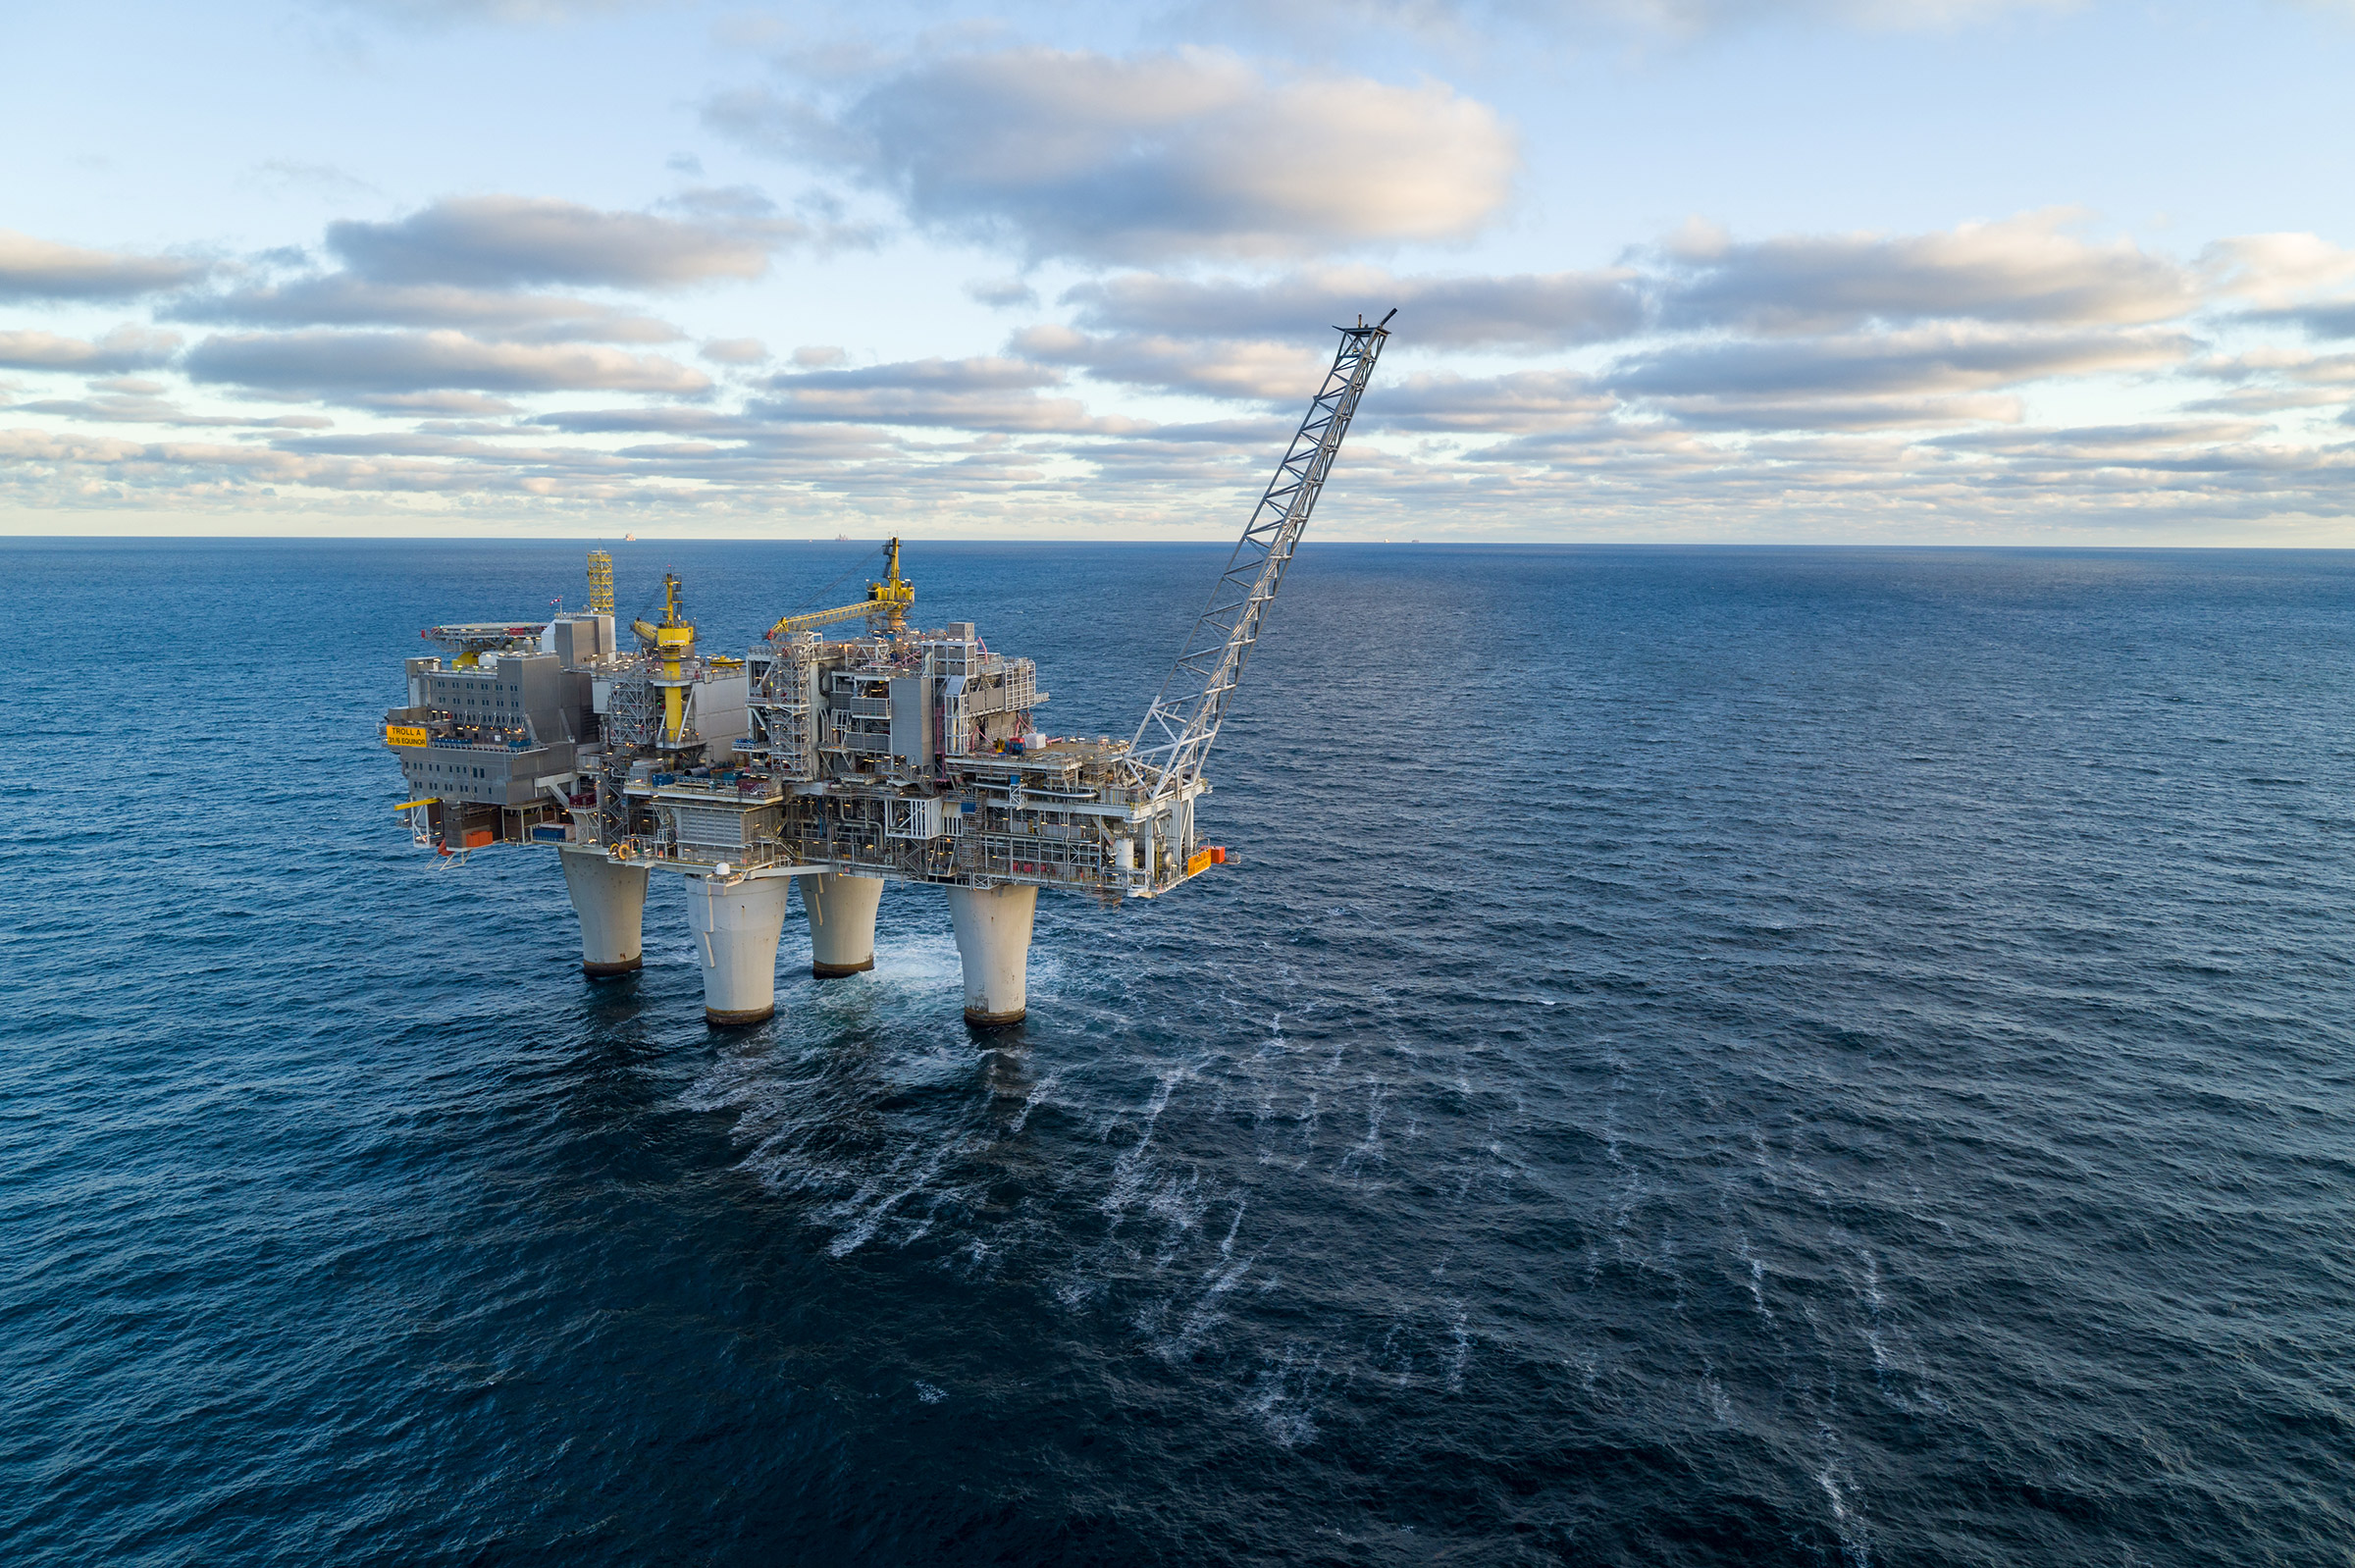 One of Equinor’s gas production sites, located off the coast of Norway (Courtesy Øyvind Gravås and Even Kleppa—Equinor)